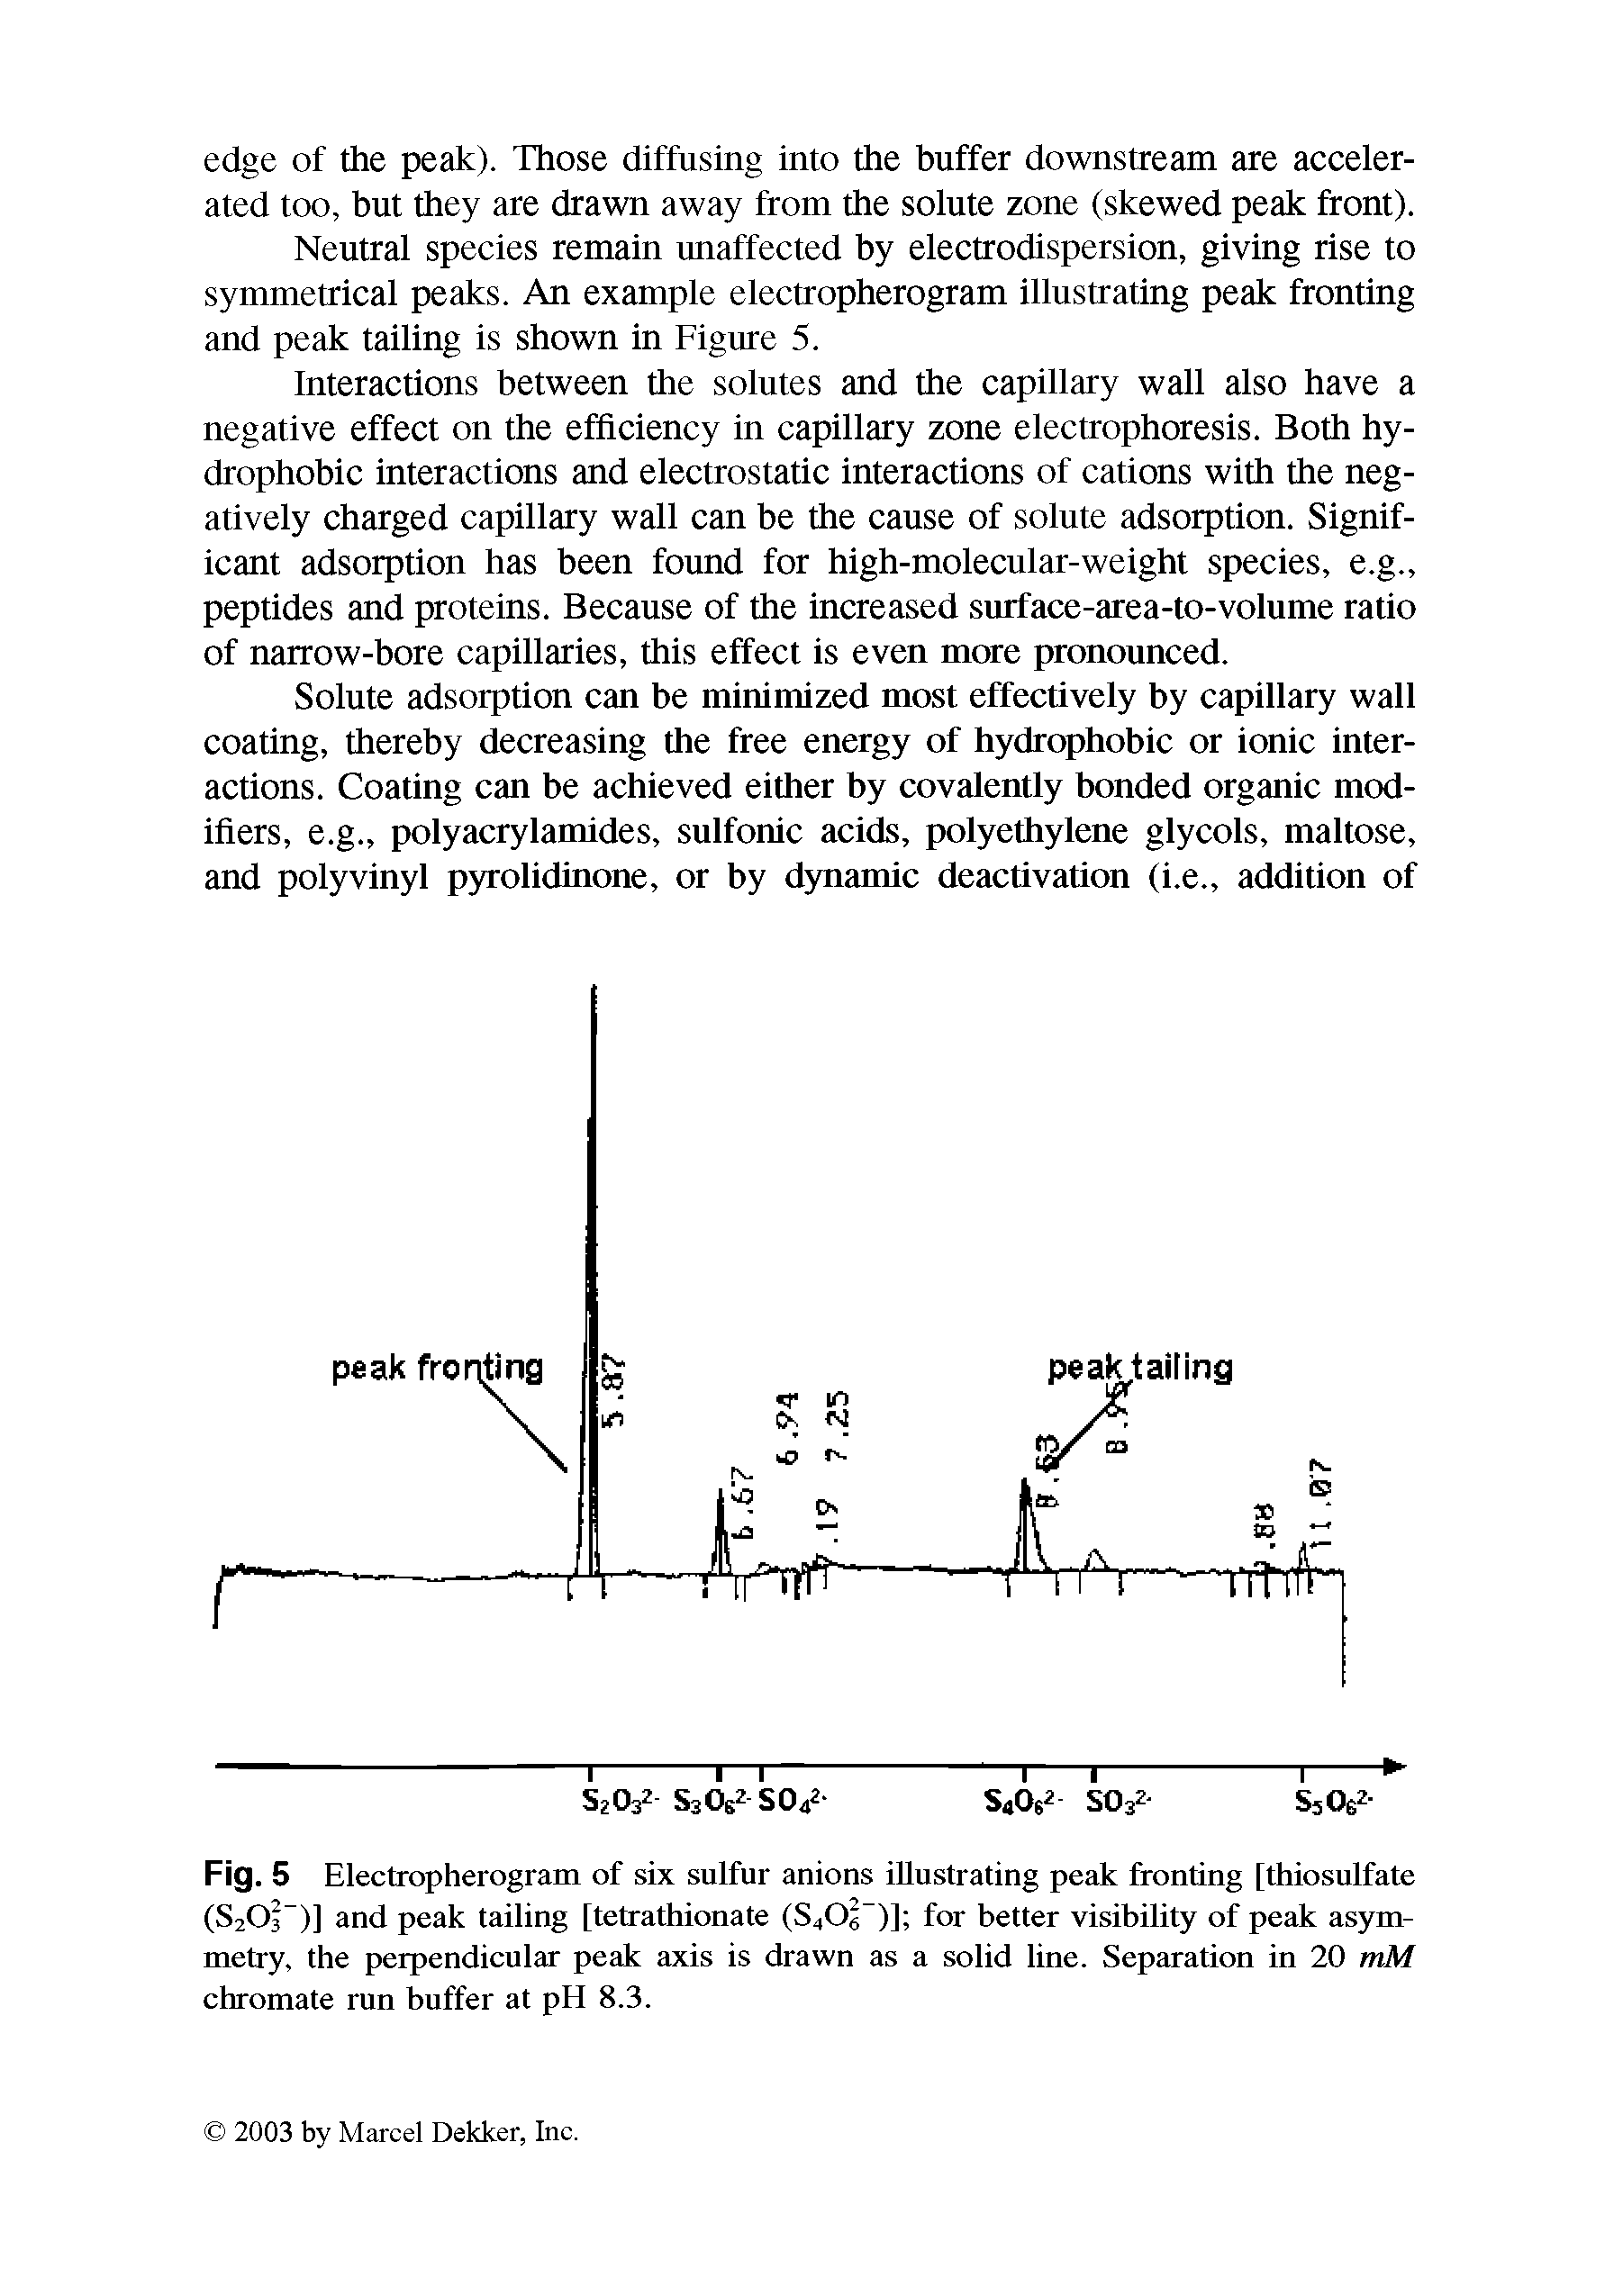 Fig. 5 Electropherogram of six sulfur anions illustrating peak fronting [thiosulfate (S2Ol-)] and peak tailing [tetrathionate (S4Ol-)] for better visibility of peak asymmetry, the perpendicular peak axis is drawn as a solid line. Separation in 20 mM chromate run buffer at pH 8.3.